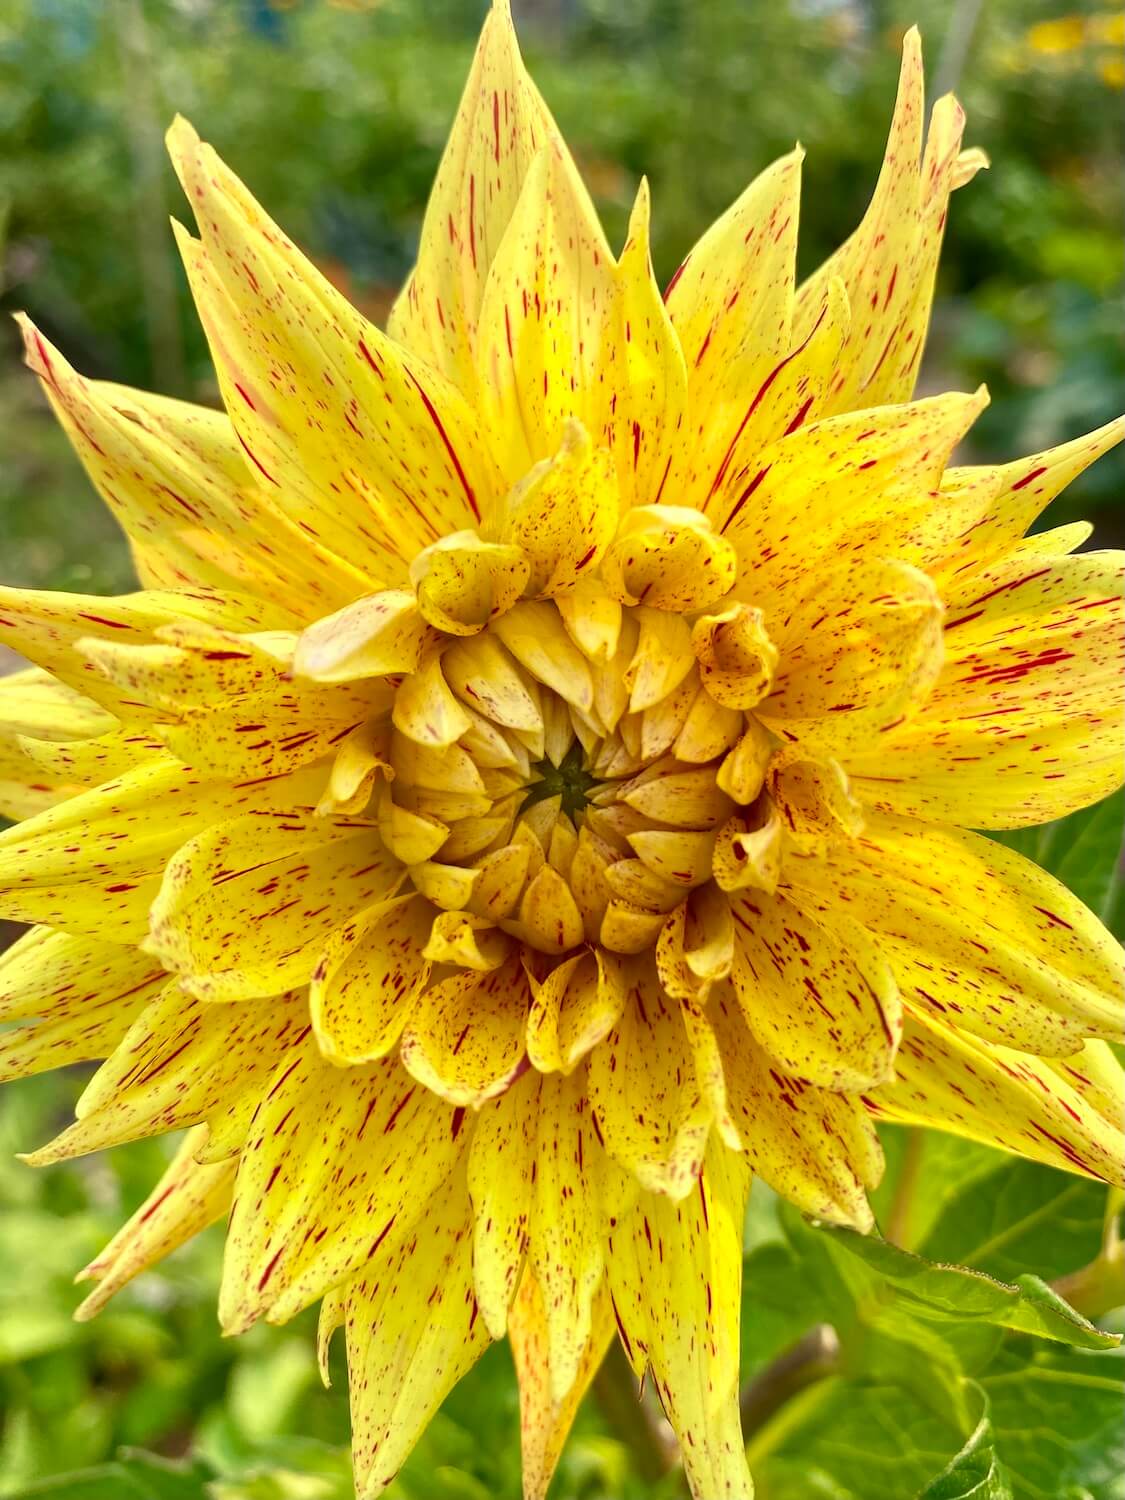 A bright yellow dahlia shines with specks of red flowing through while the green foliage is slightly out of focus.  This picture represents the Sun archetype of the tarot and was taken at a community garden in Seattle.